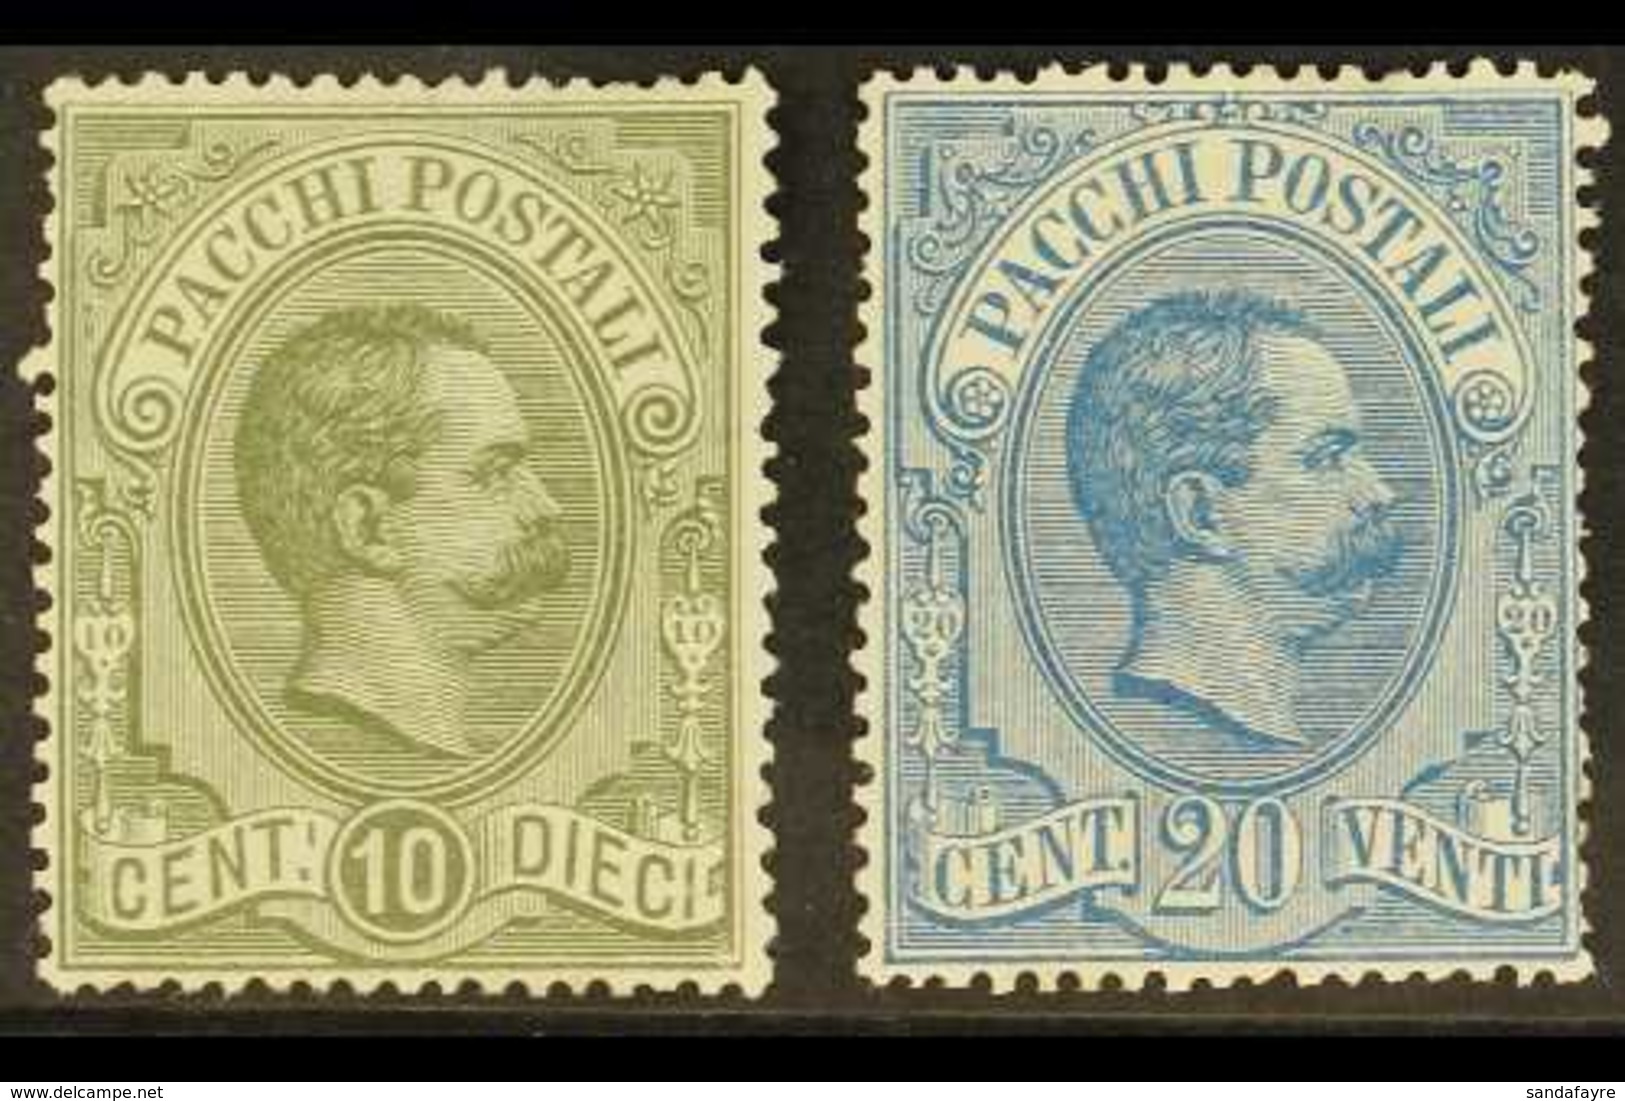 PARCEL POST  1884 10c Olive & 20c Blue, Sassone 1/2, Mi 1/2, 20c Blunt Perfs At Right, Otherwise Never Hinged Mint (2 St - Ohne Zuordnung